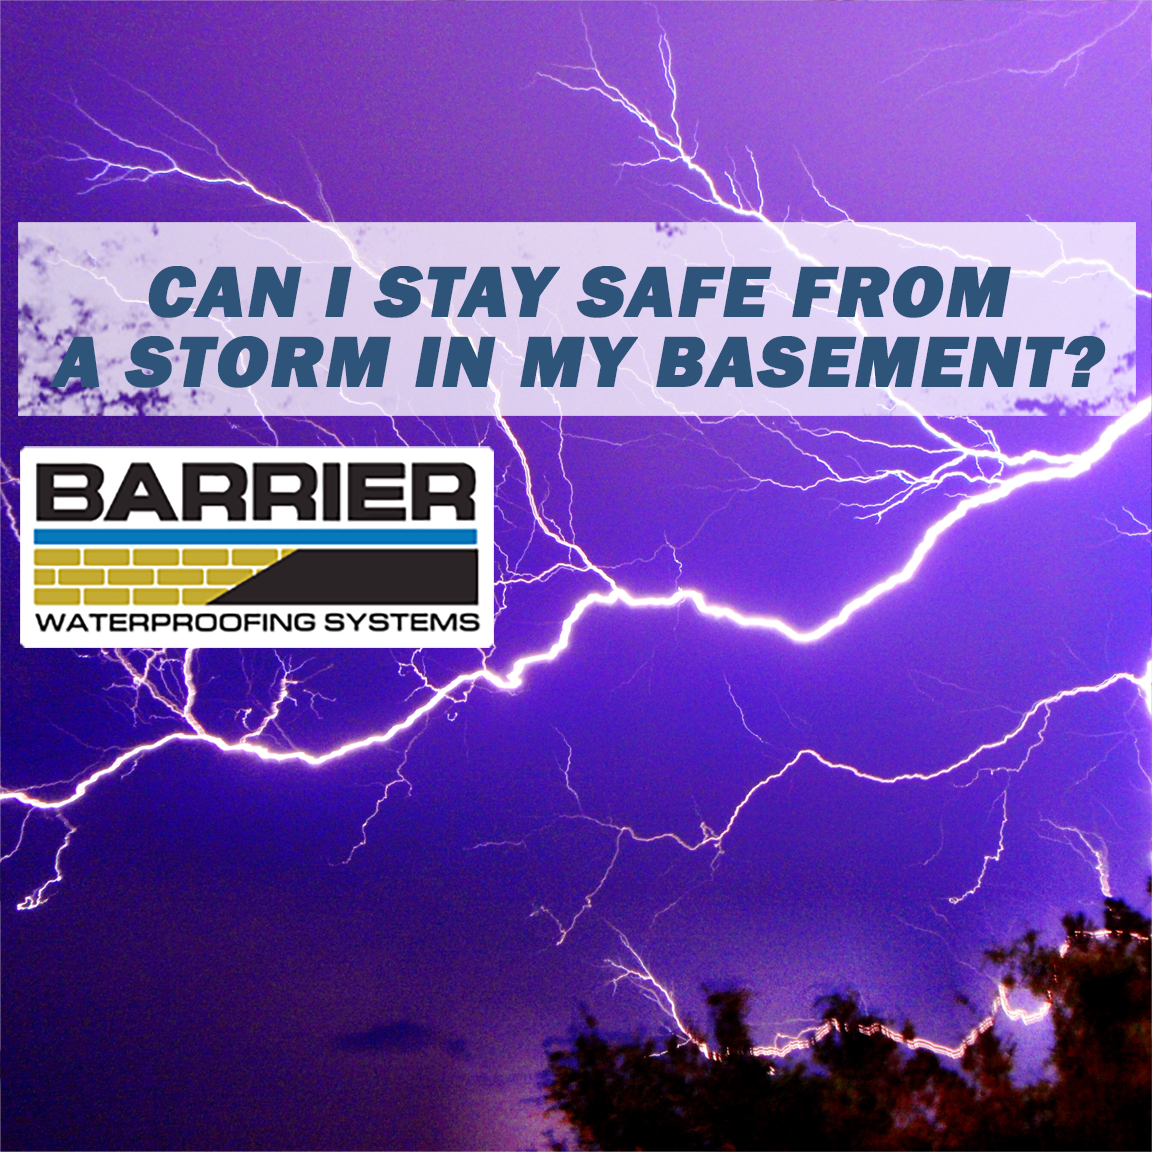 Lightning depicting can I stay safe from a storm in my basement